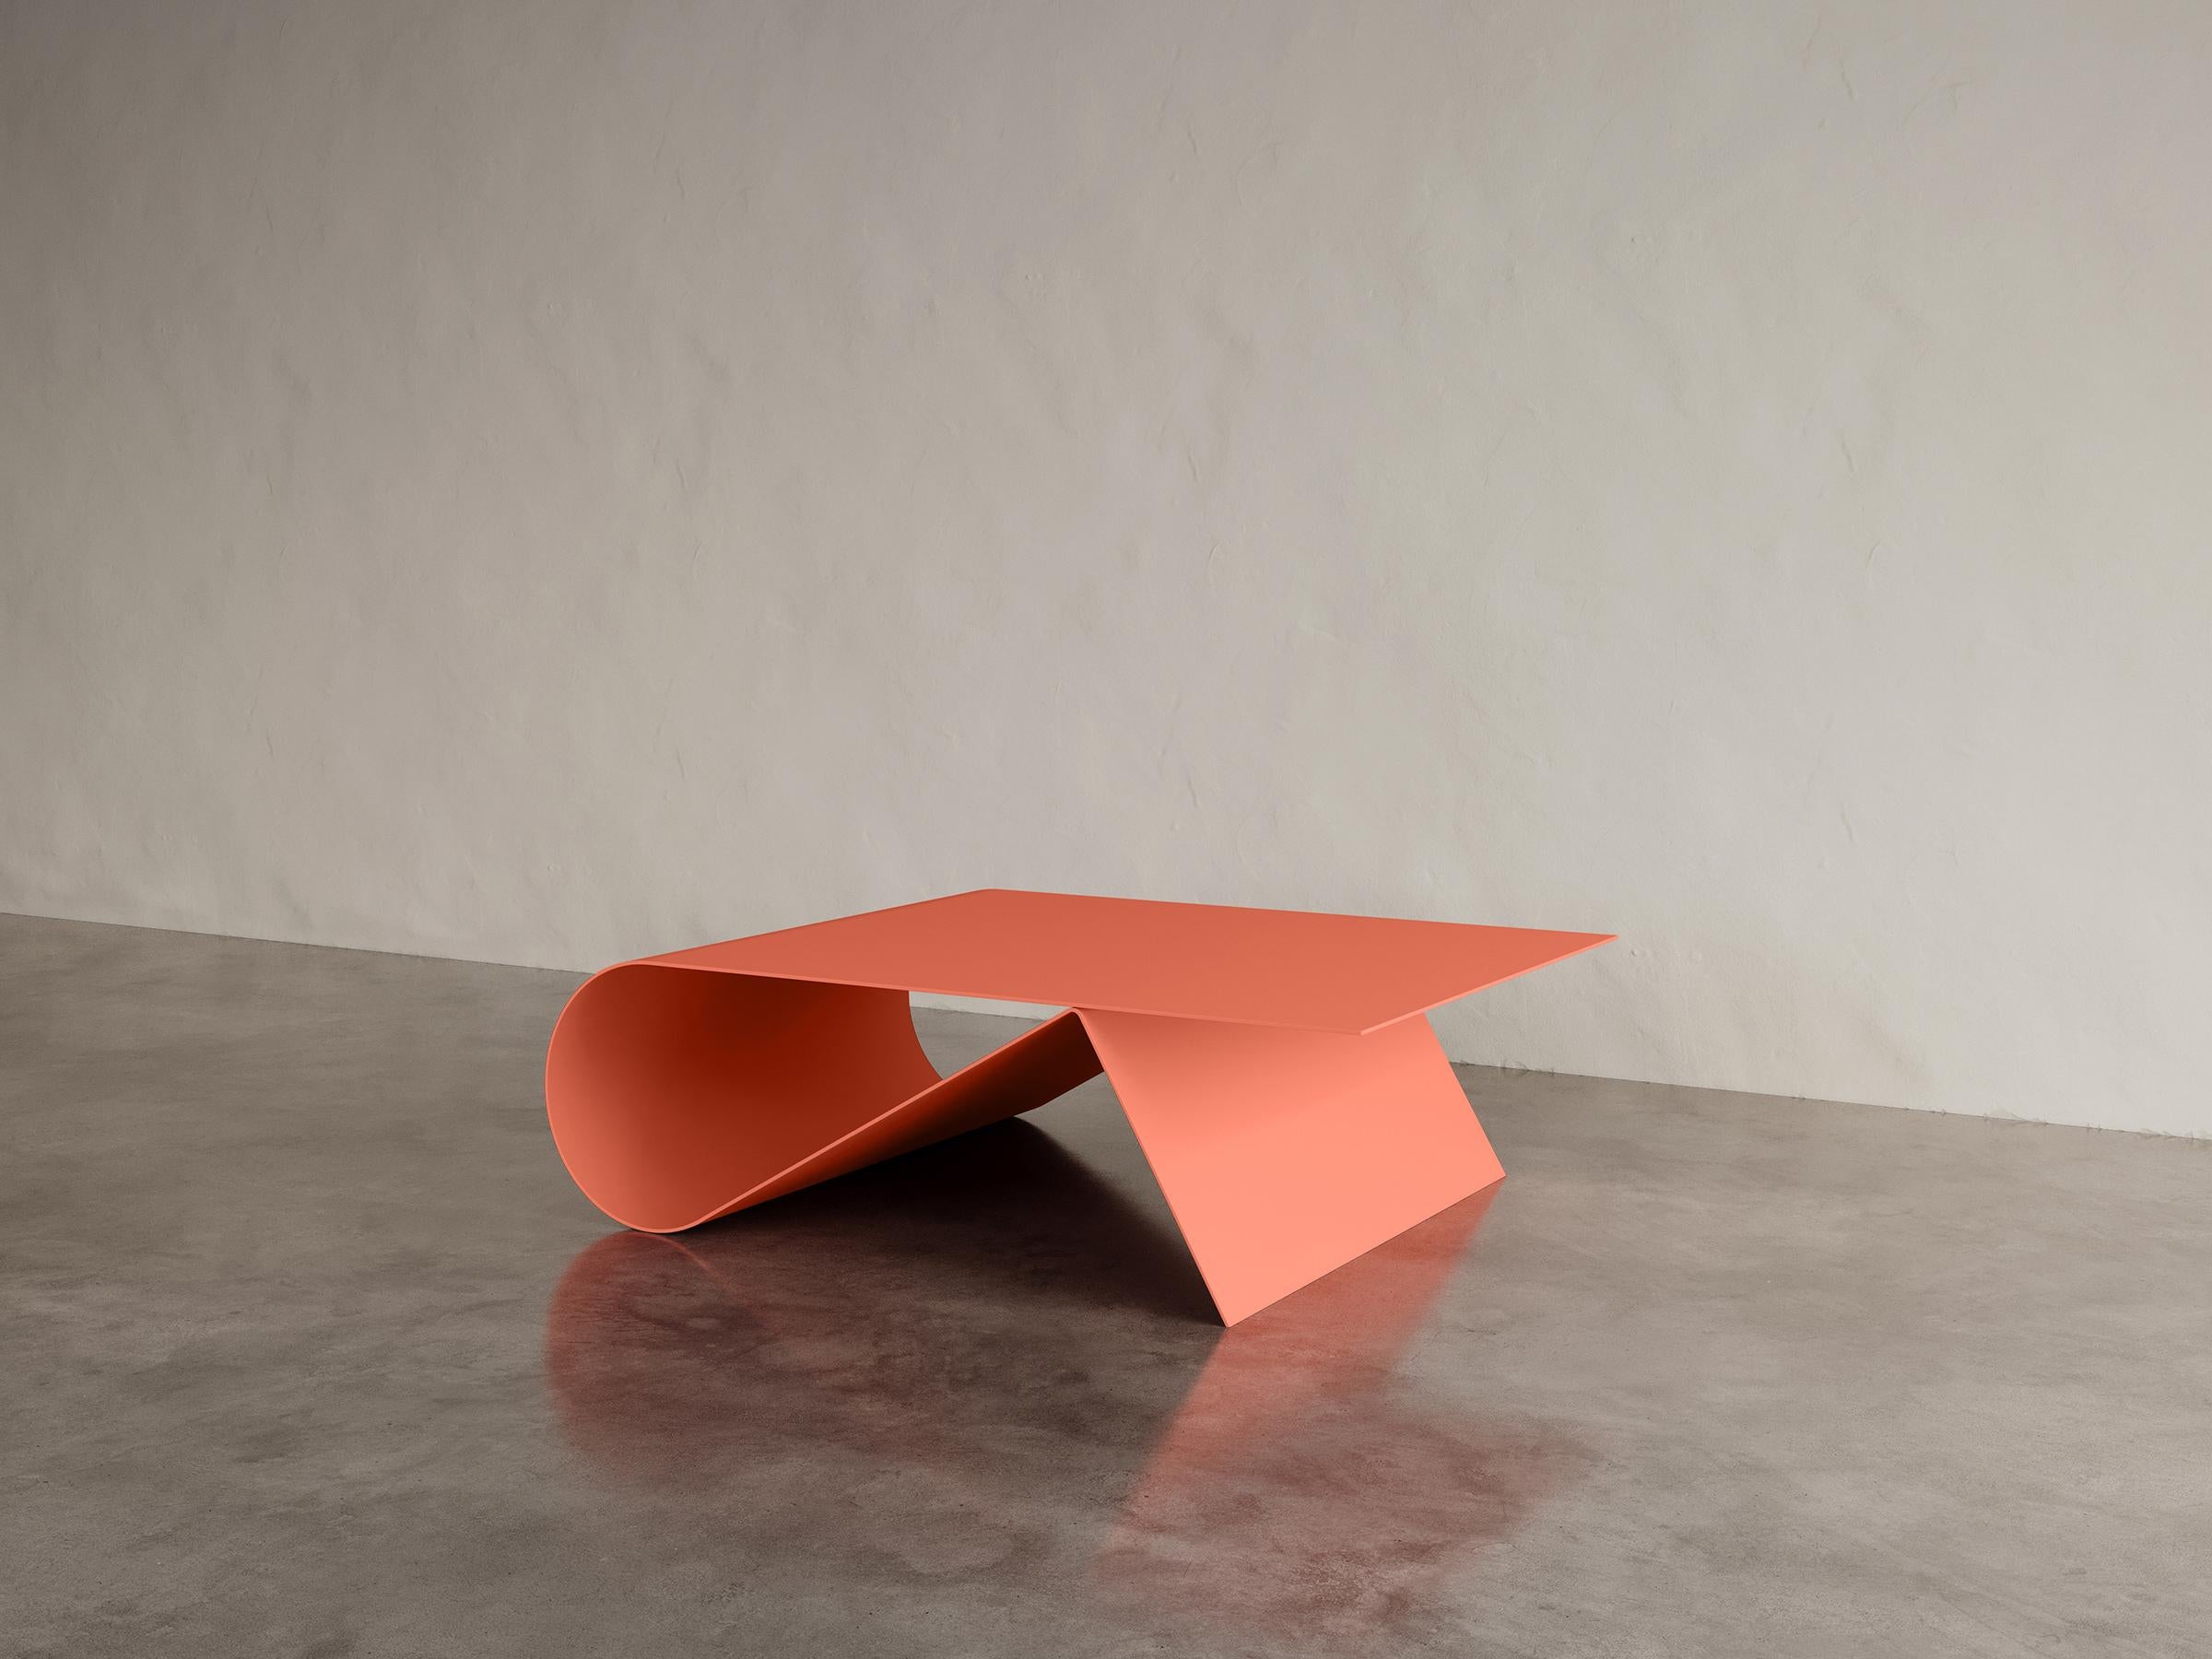 Bent Coral Orange Coffee Table by Etamorph
Dimensions: D 70 x W 120 x H 40 cm.
Materials: Powder-coated carbon steel.

Custom RAL colors available on demand. Please contact us. 

ETAMORPH is a NYC-based design boutique studio specializing in